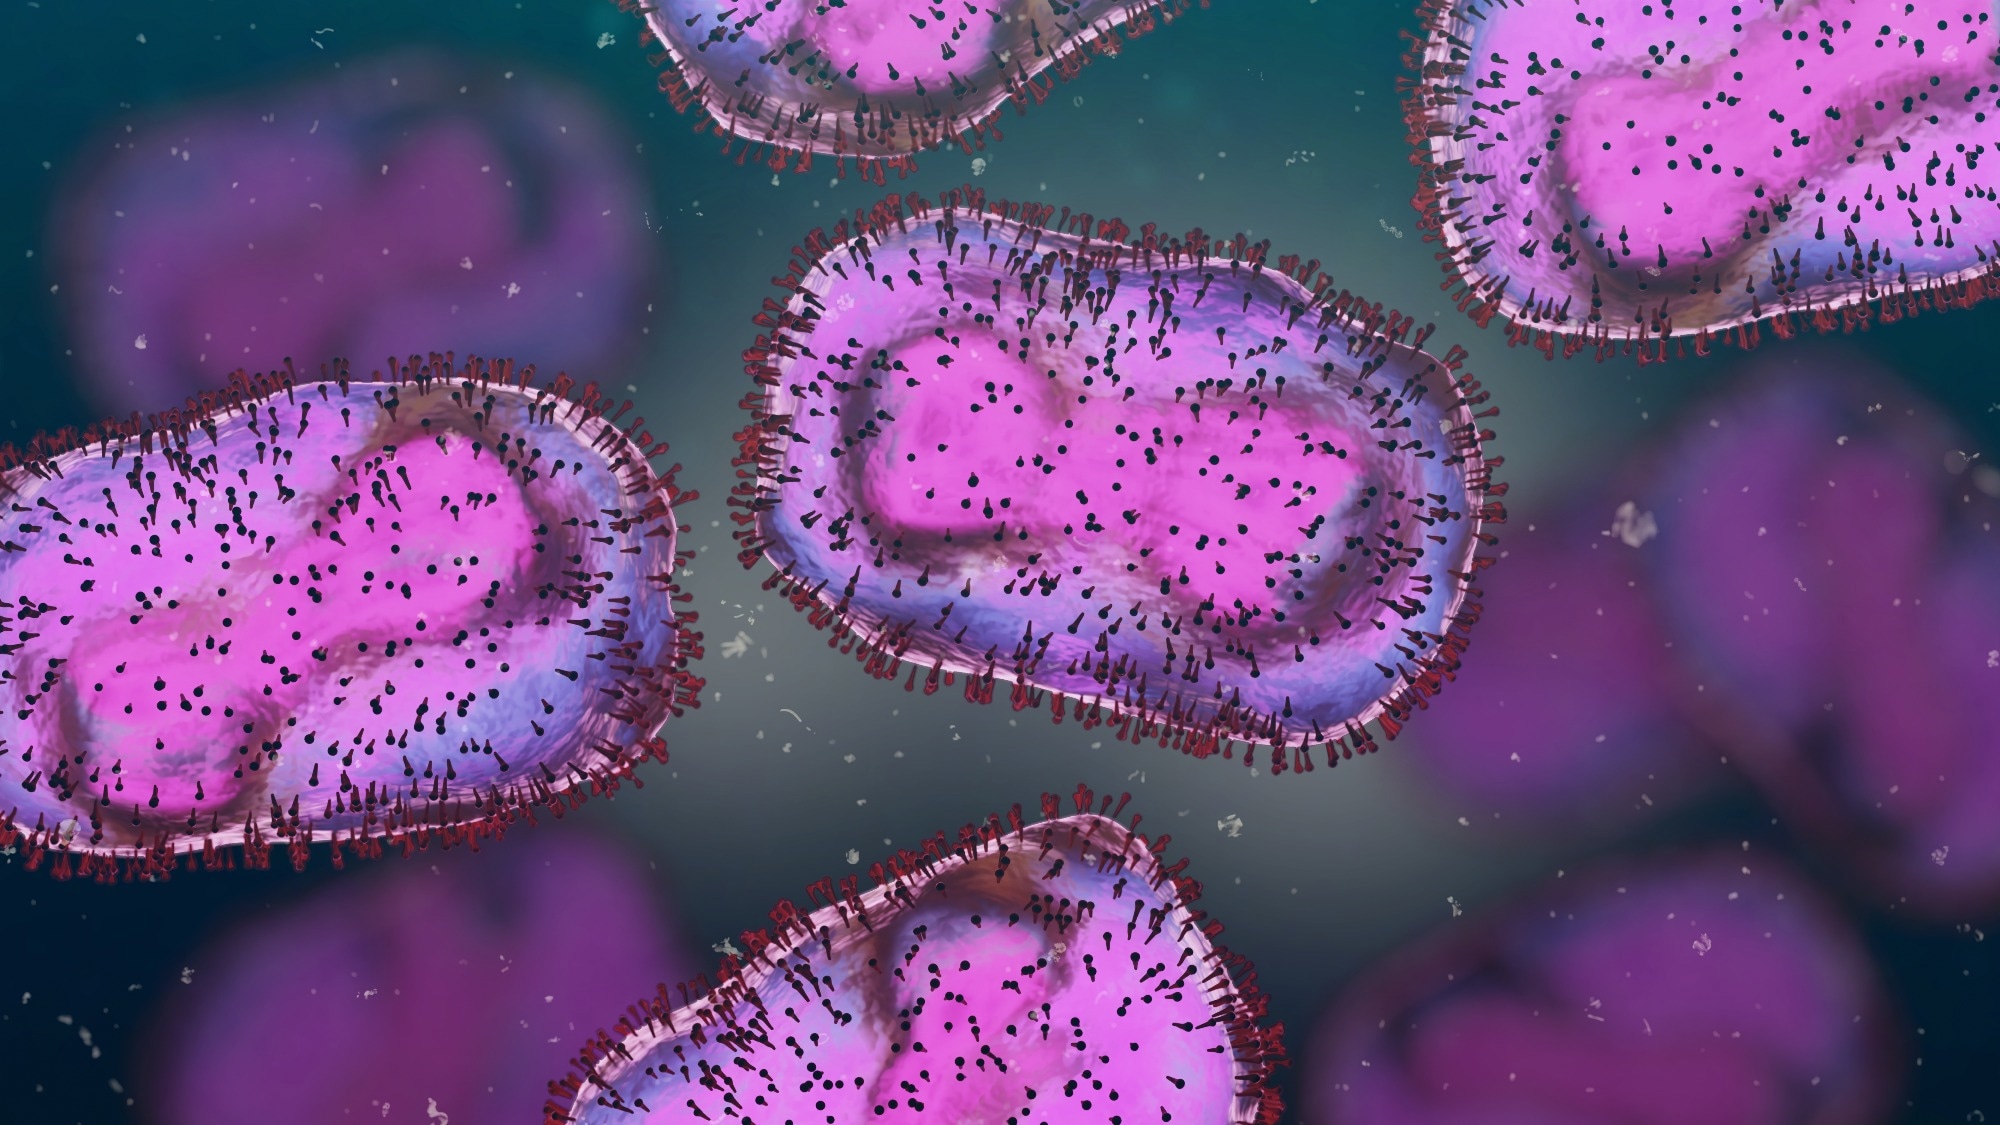 Study: Rapid detection of monkeypox virus using a CRISPR-Cas12a mediated assay: a laboratory validation and evaluation study. Image Credit: Dotted Yeti/Shutterstock.com